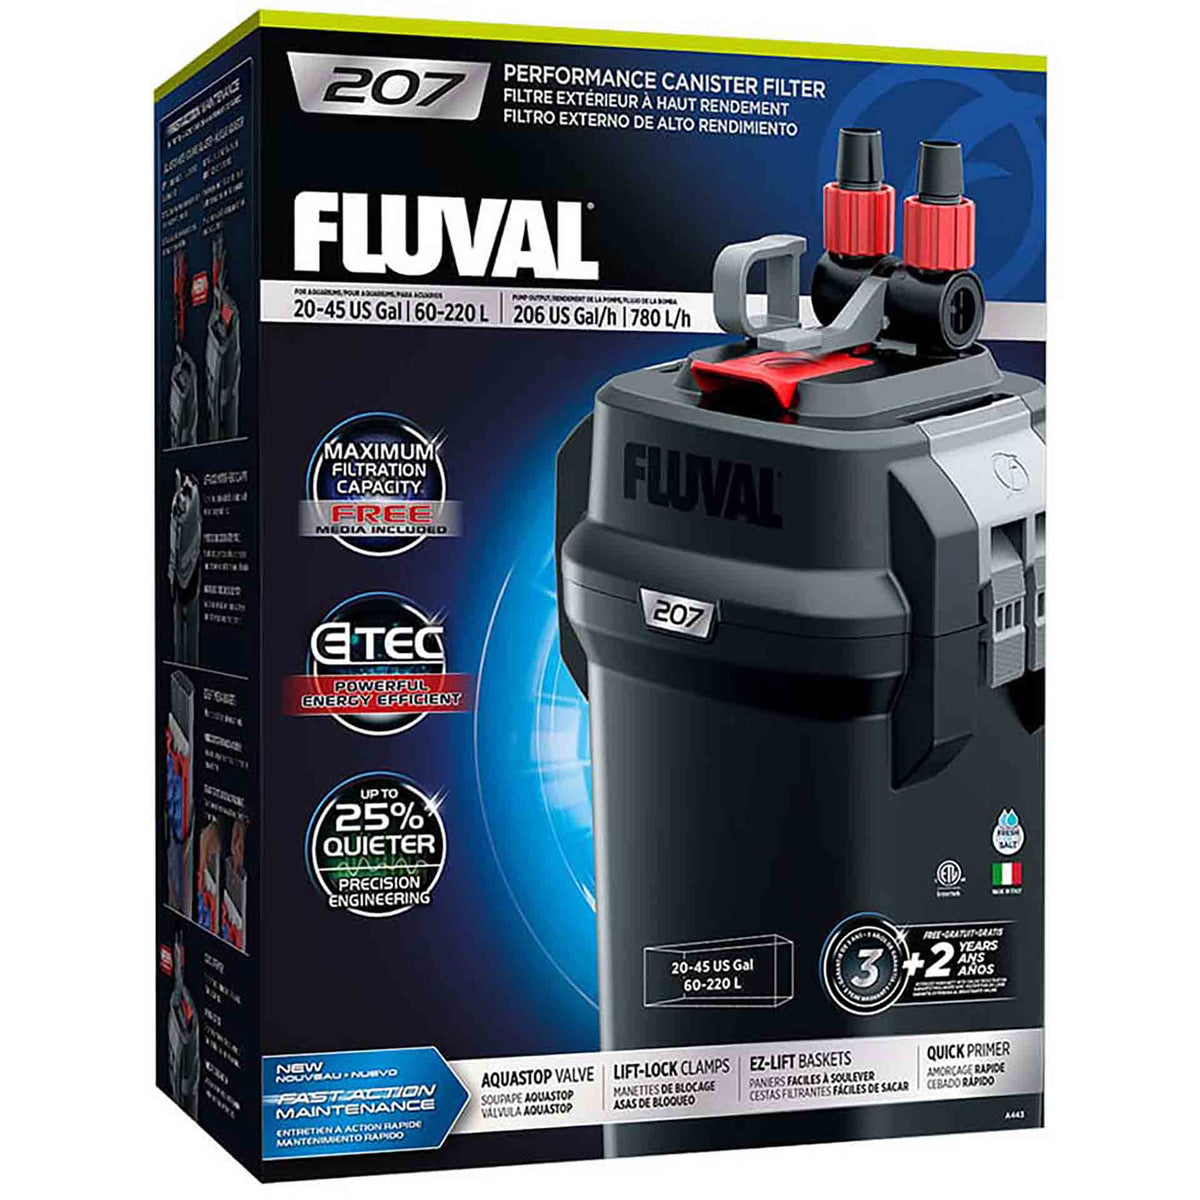 Fluval 207 Performance Canister Filter, up to 220 L Aquarium